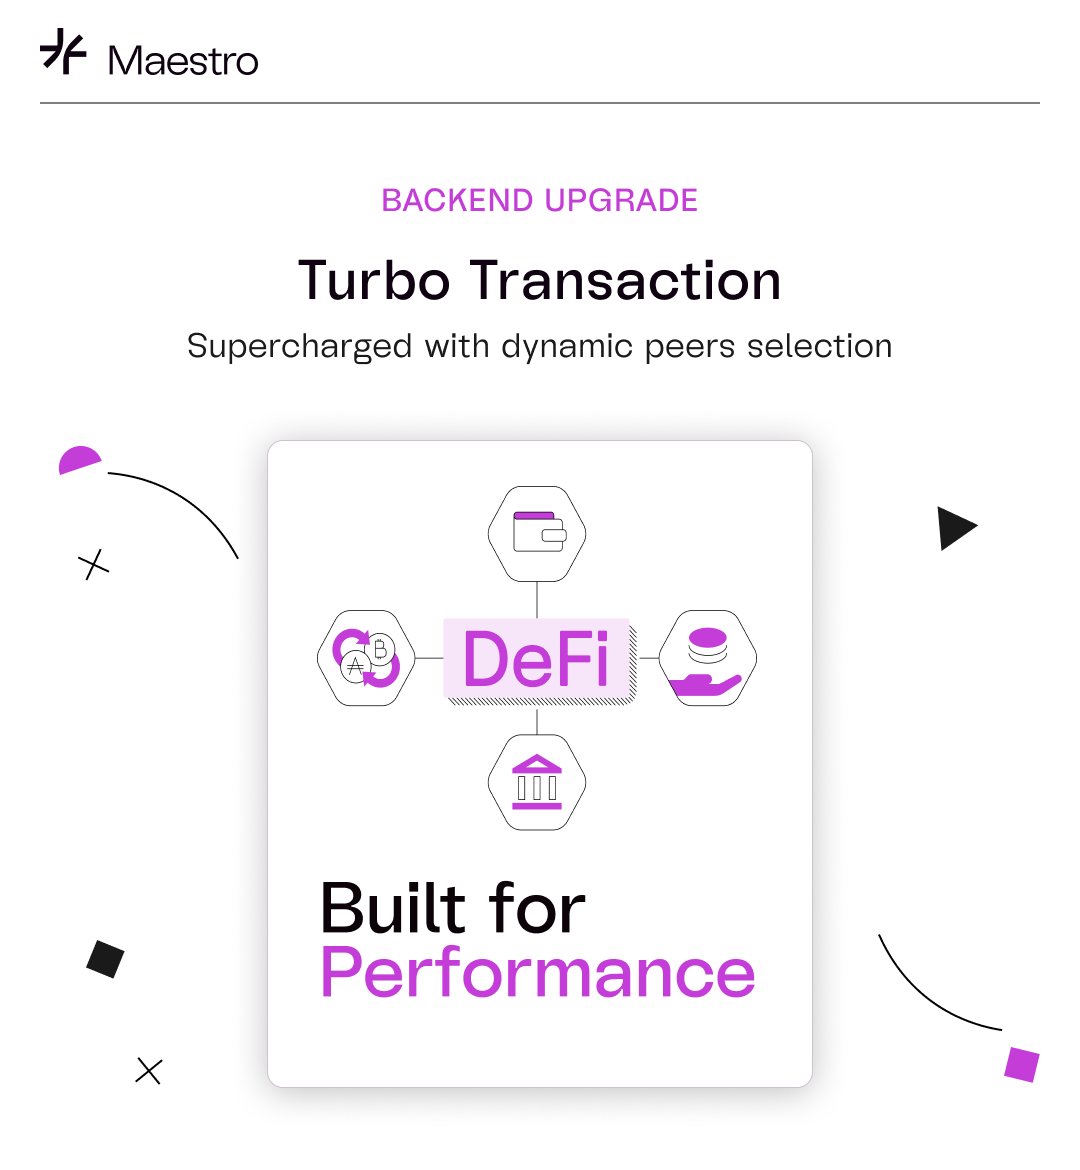 Turbo Transaction Update: Now with more Turbo 🏎 The fastest just got faster ⚡️ Our optimized submission pipeline improves transaction propagation reliability especially during heavy network load 🎯 Give it a spin #Cardano $ADA family! docs.gomaestro.org/User-Guides/tx…